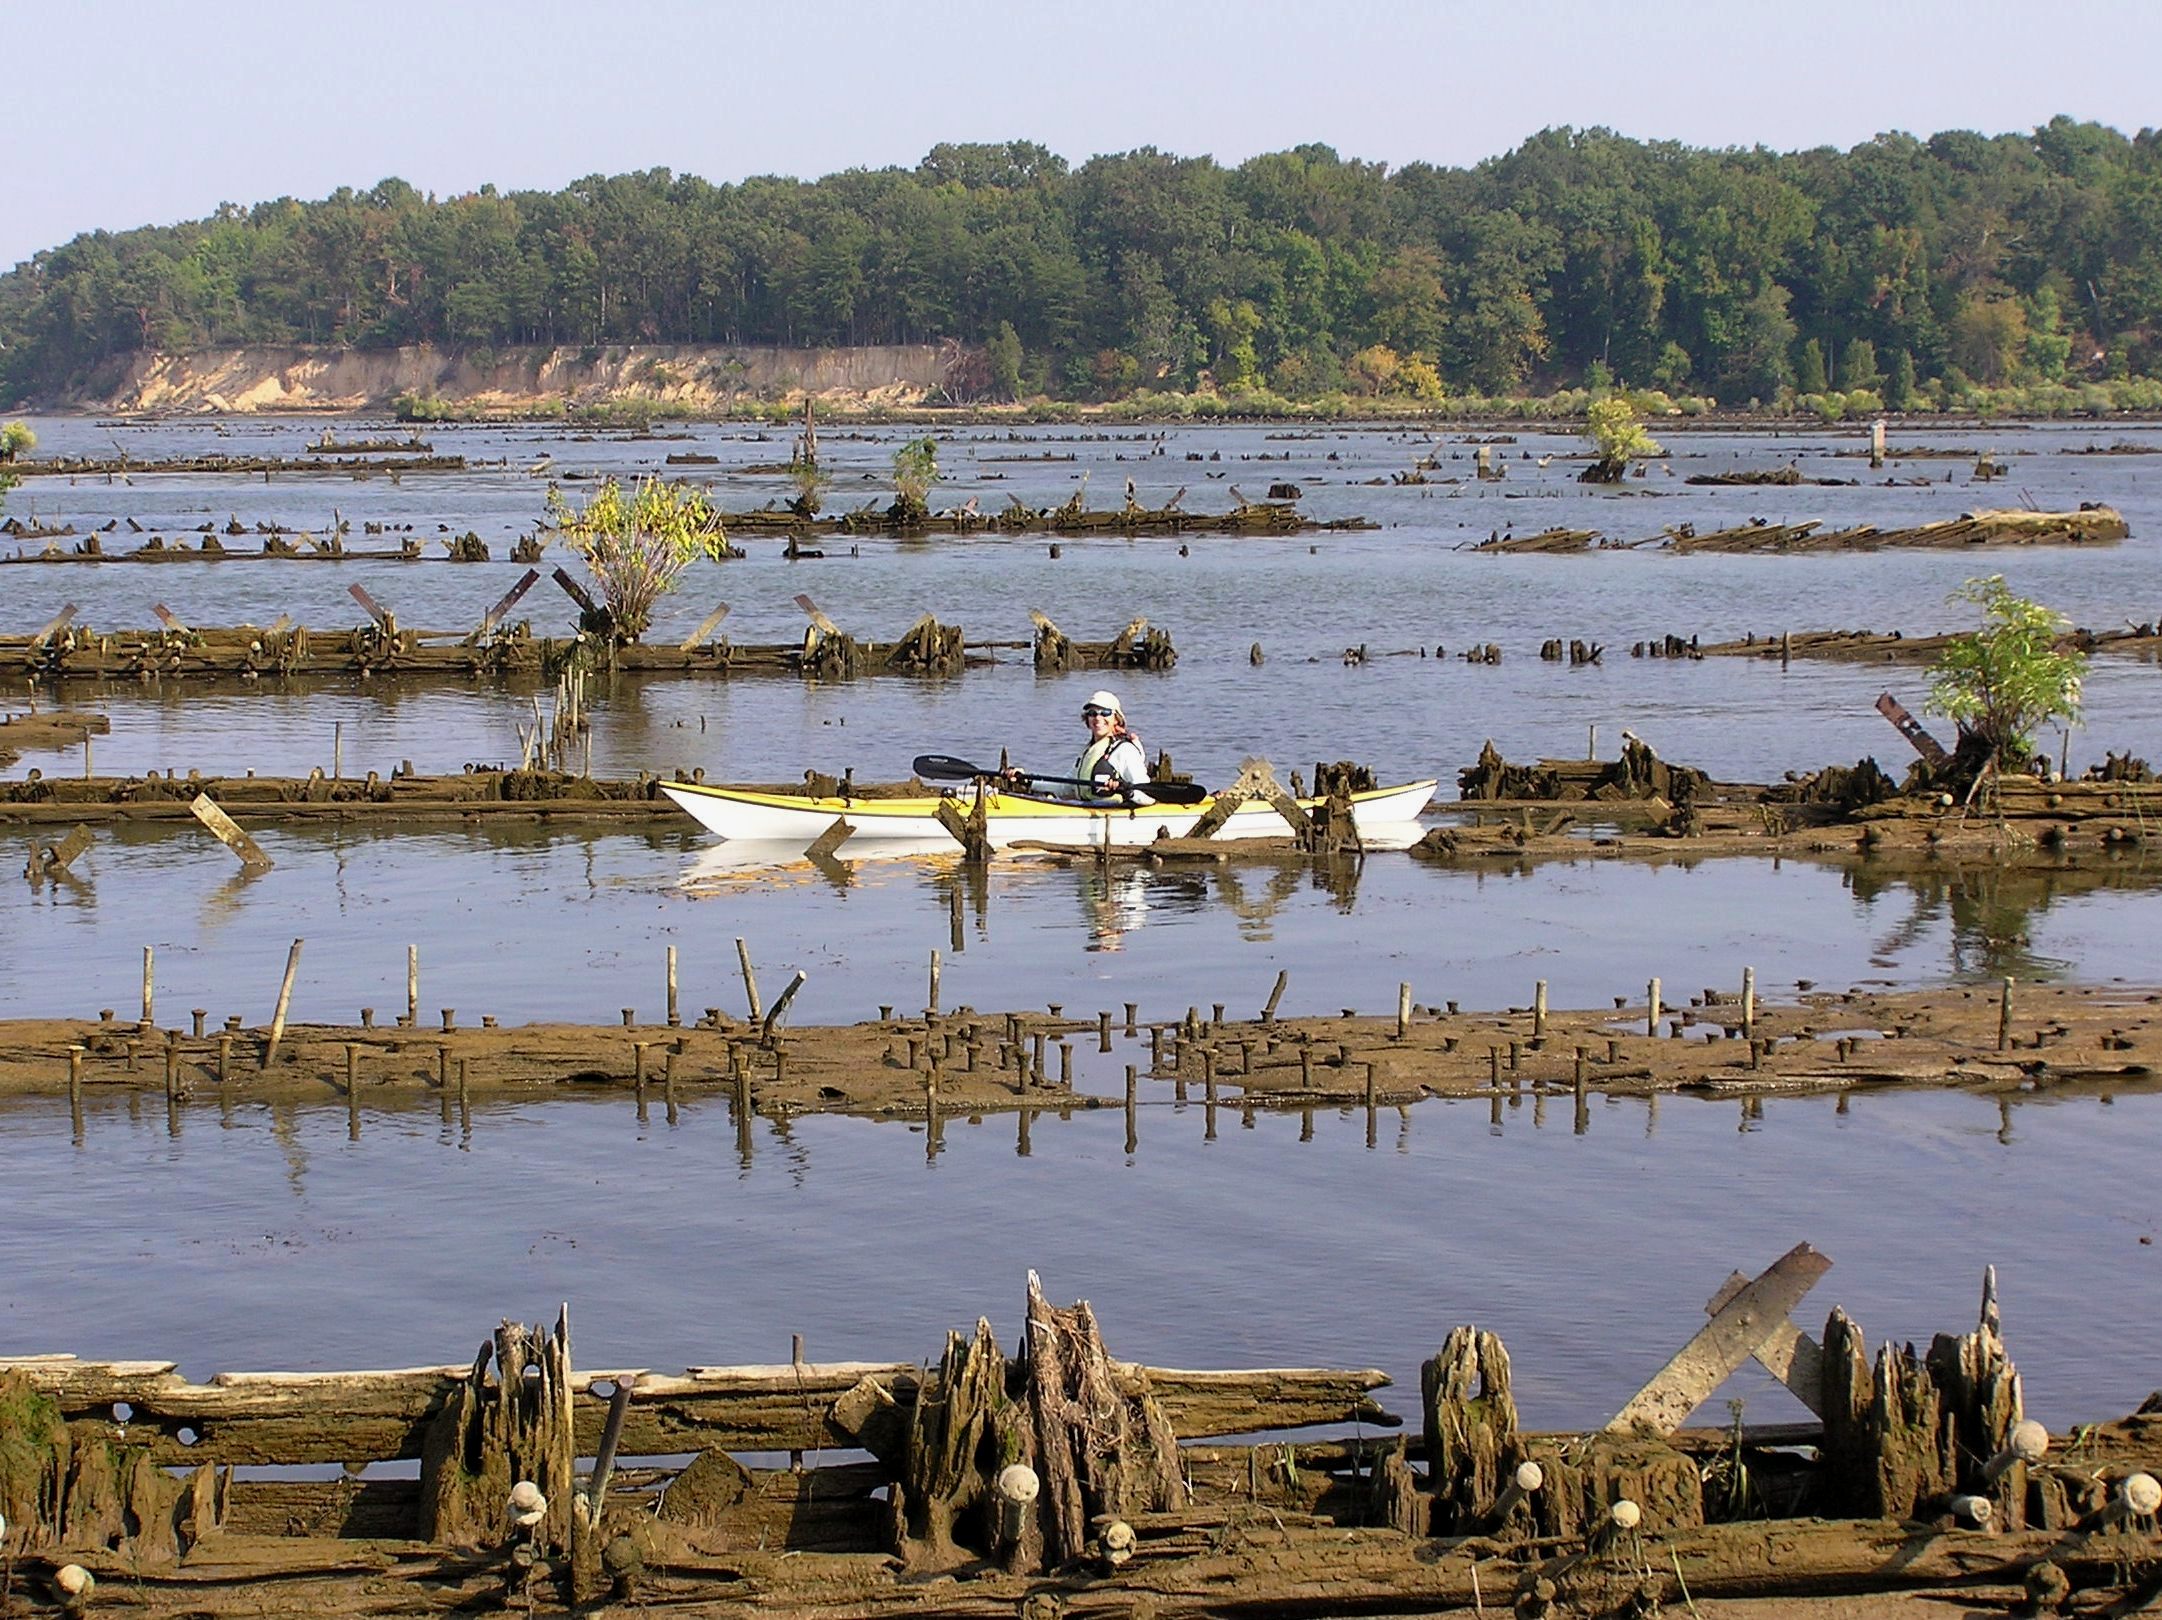 Yvonne T. on her kayak in the Mallows Bay Ship Graveyard